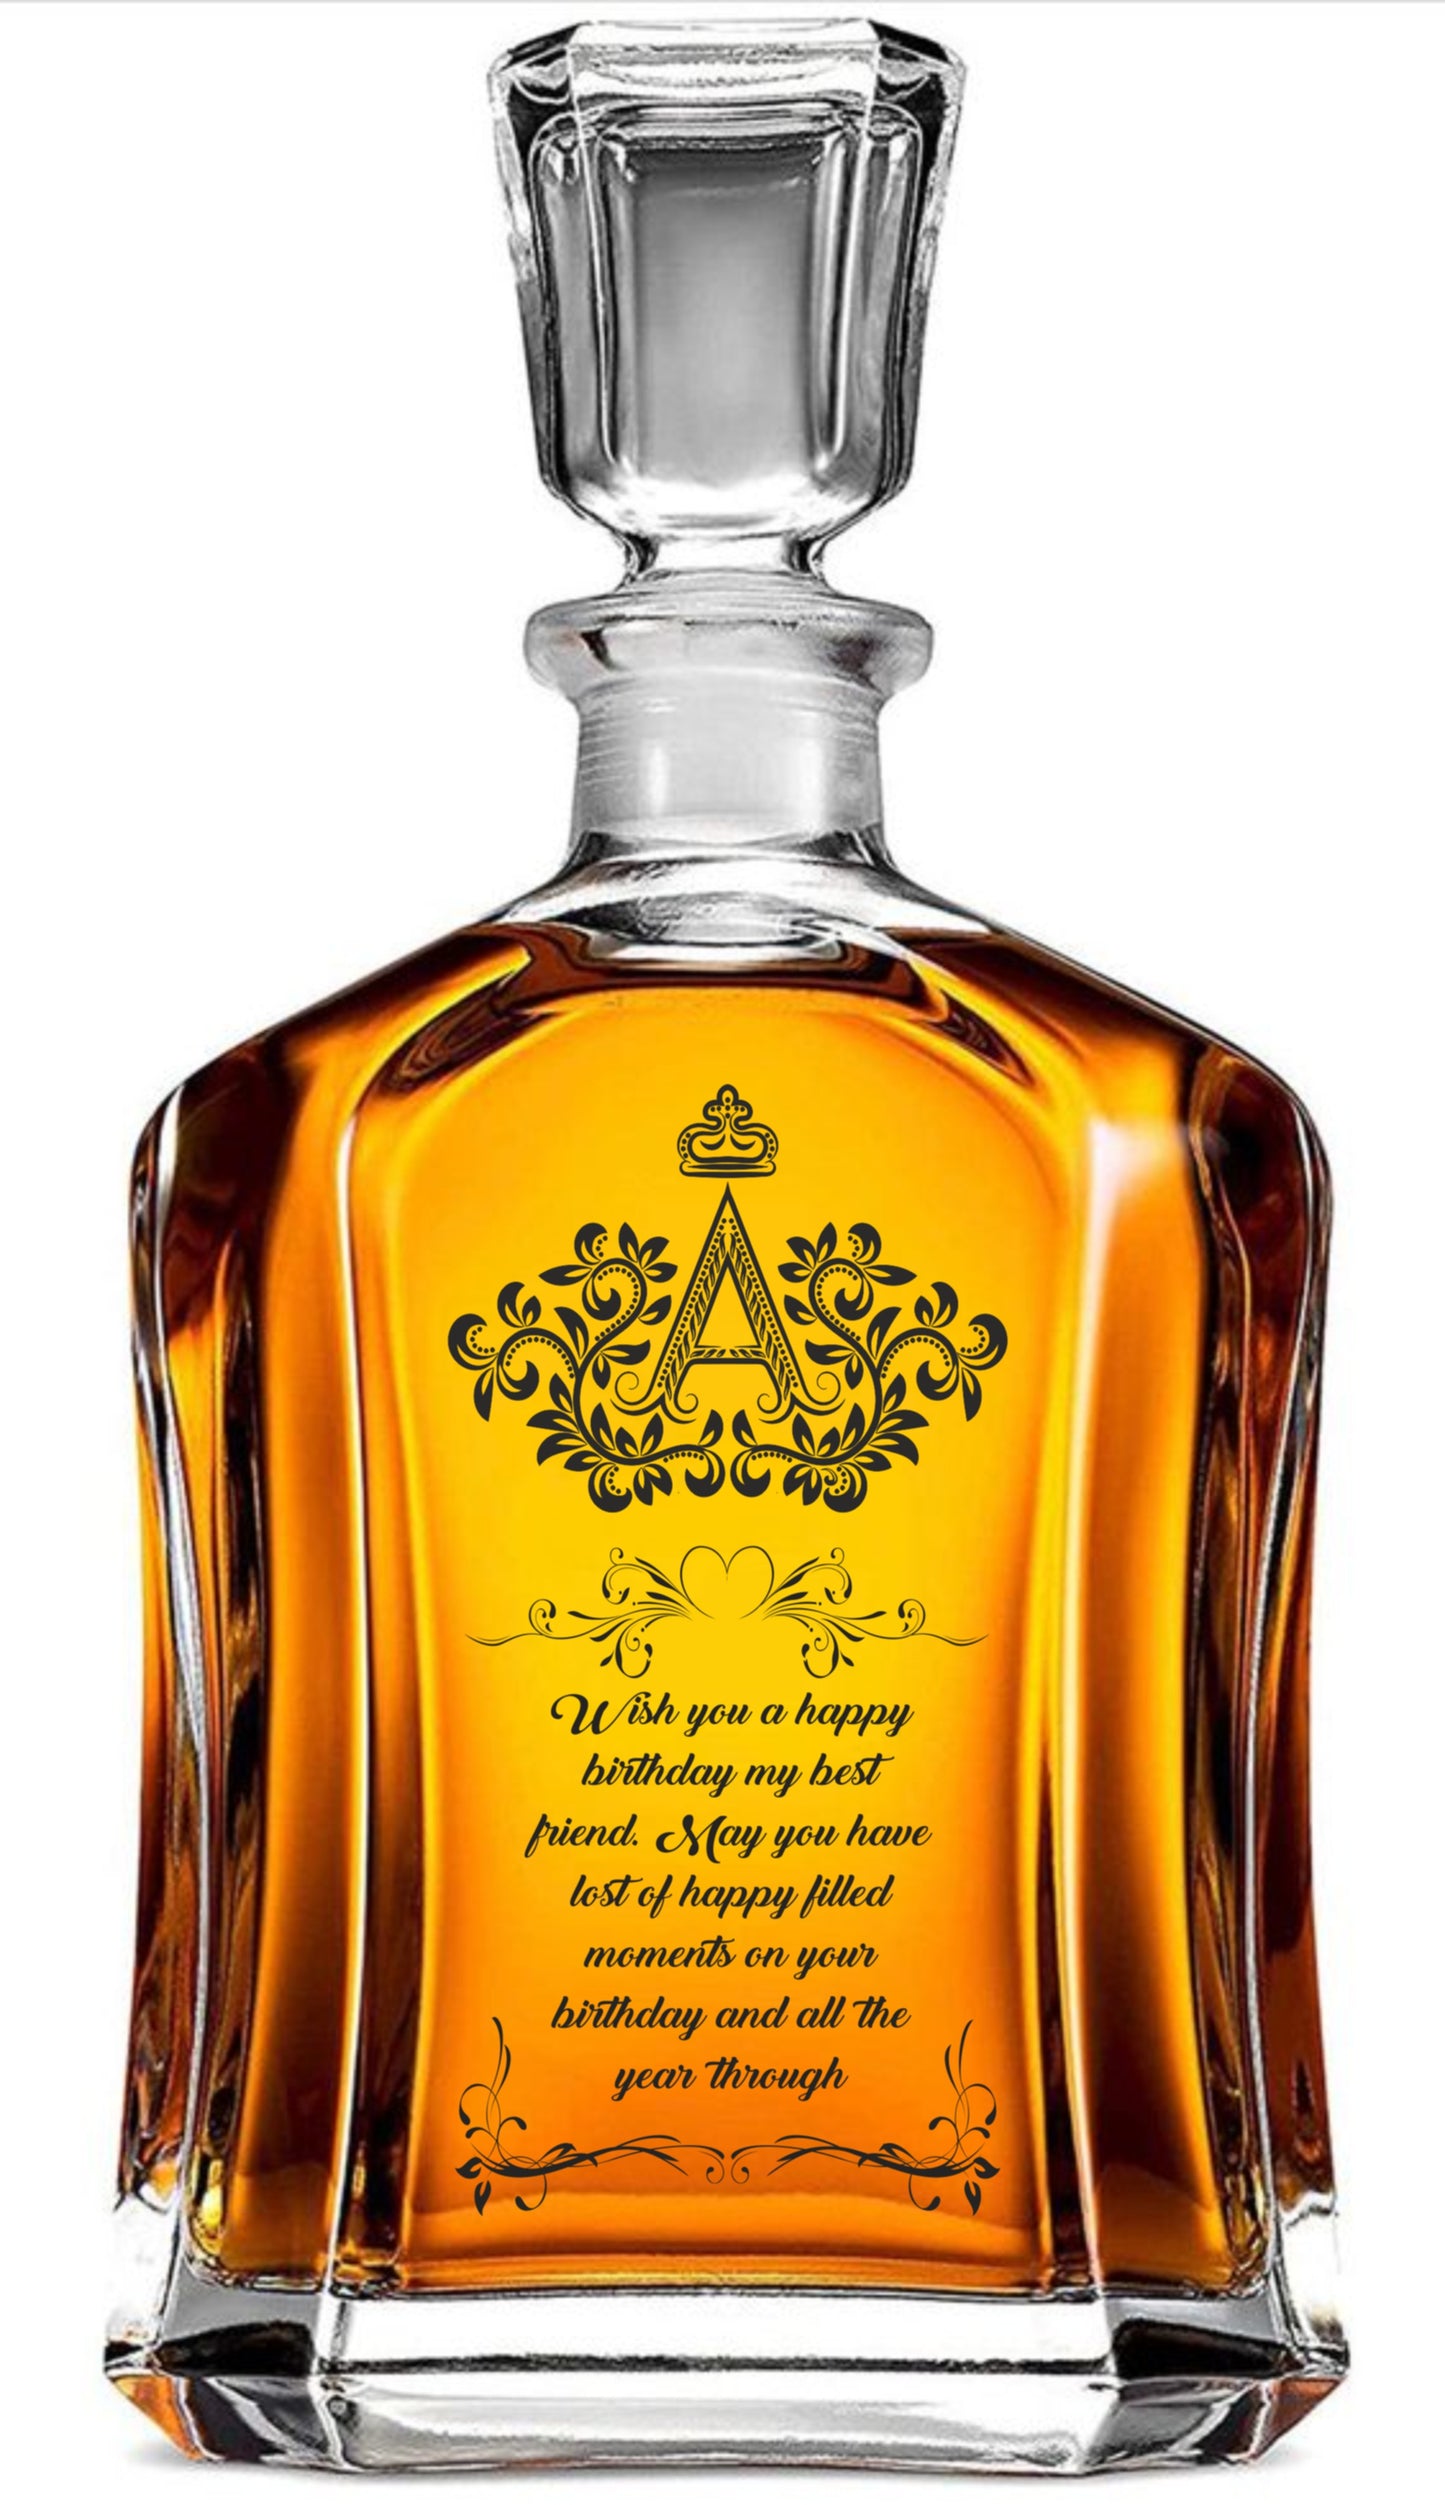 Best2U- Personalized Engraved Whiskey Decanter